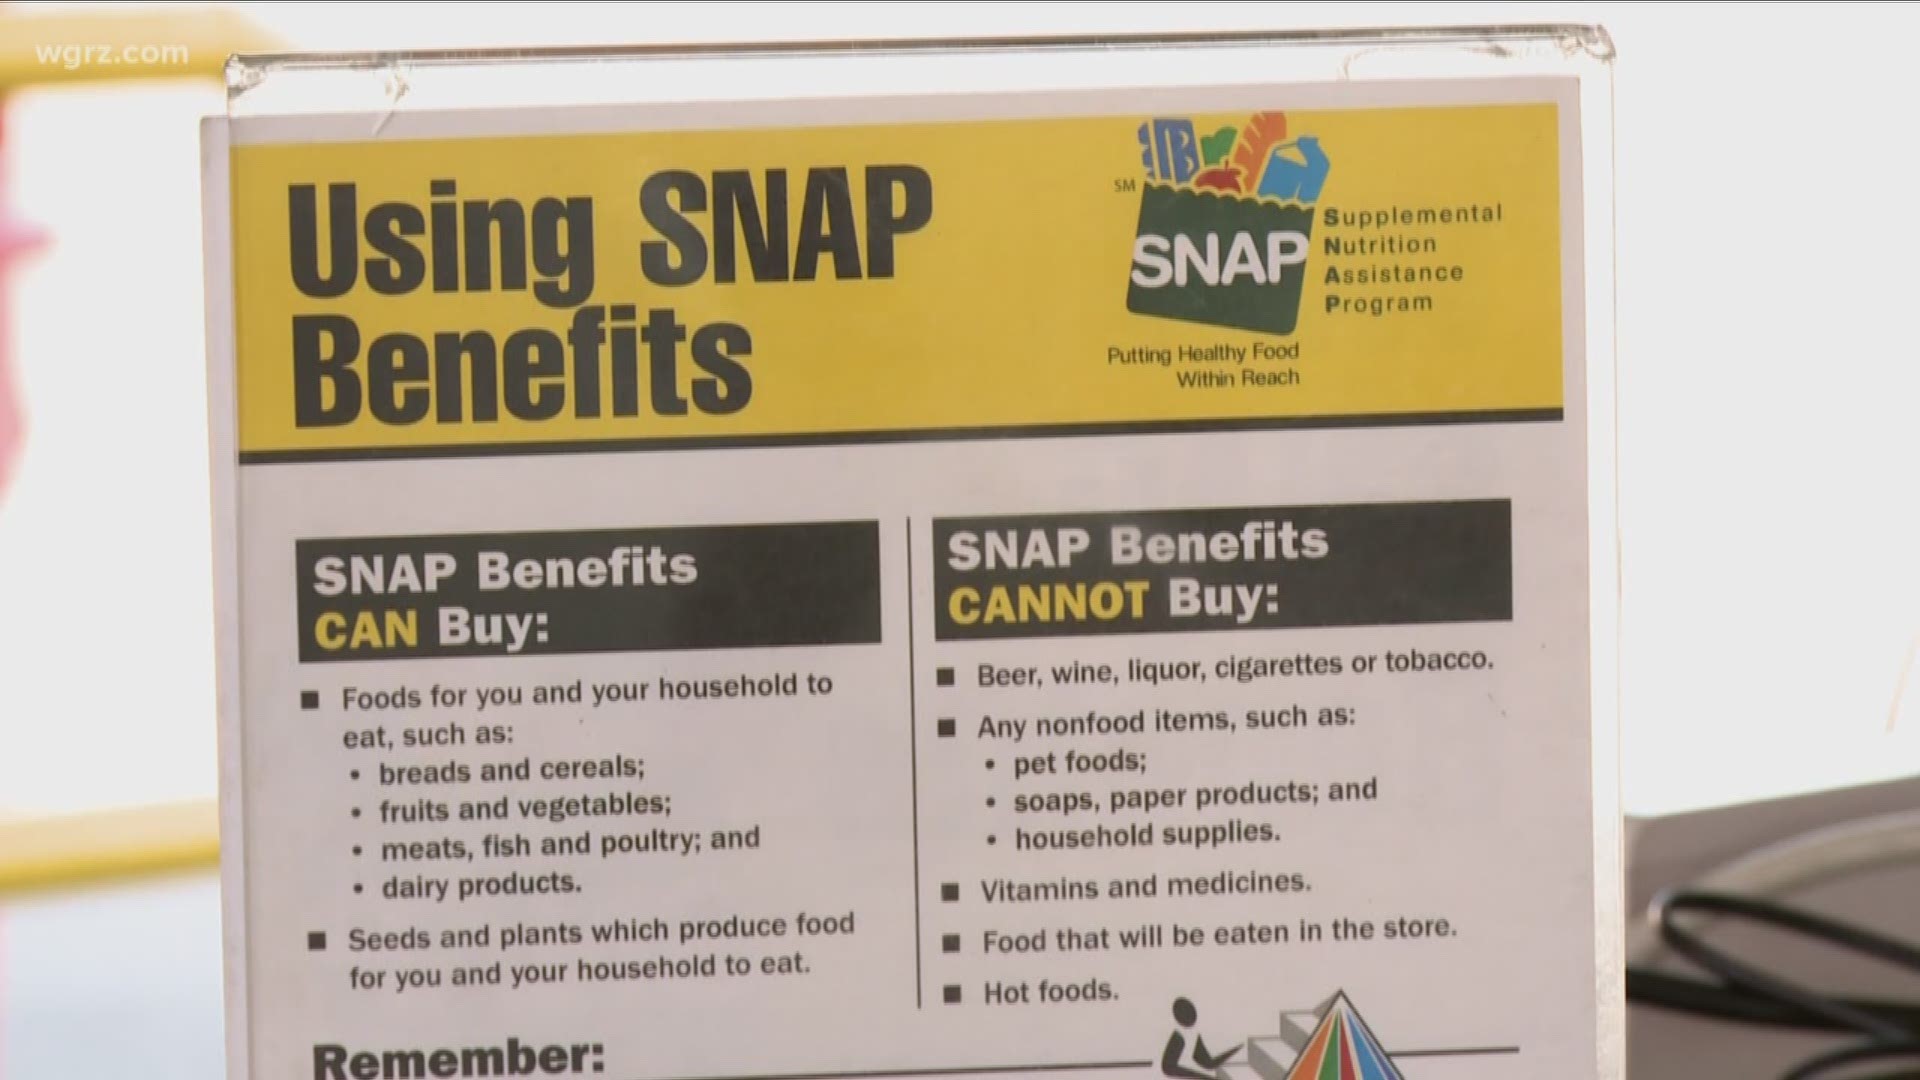 Snap benefits funded  through February